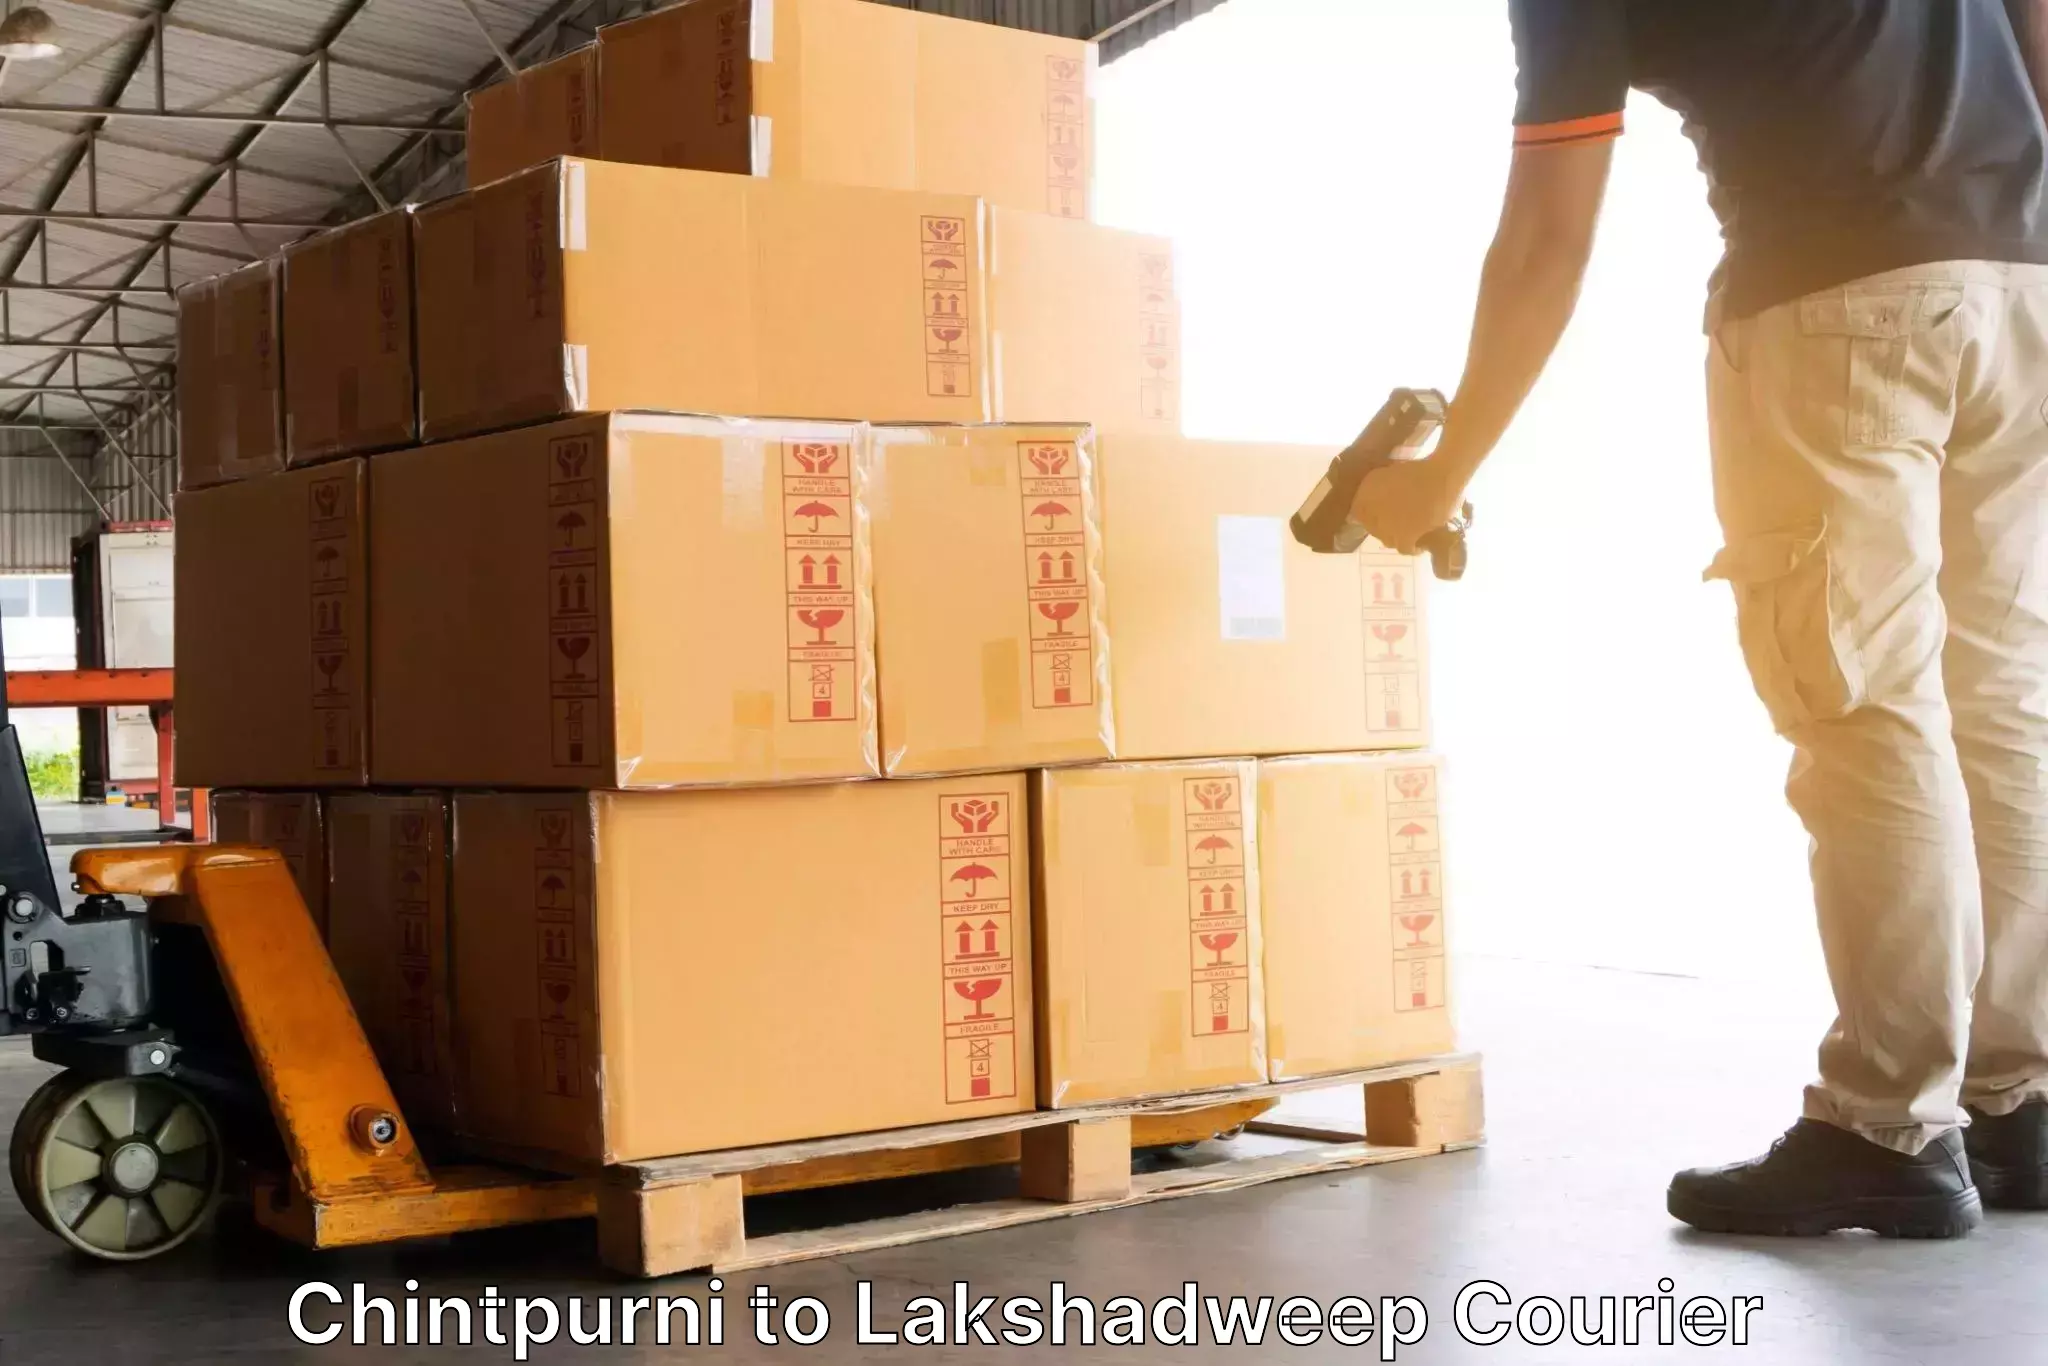 Business delivery service Chintpurni to Lakshadweep